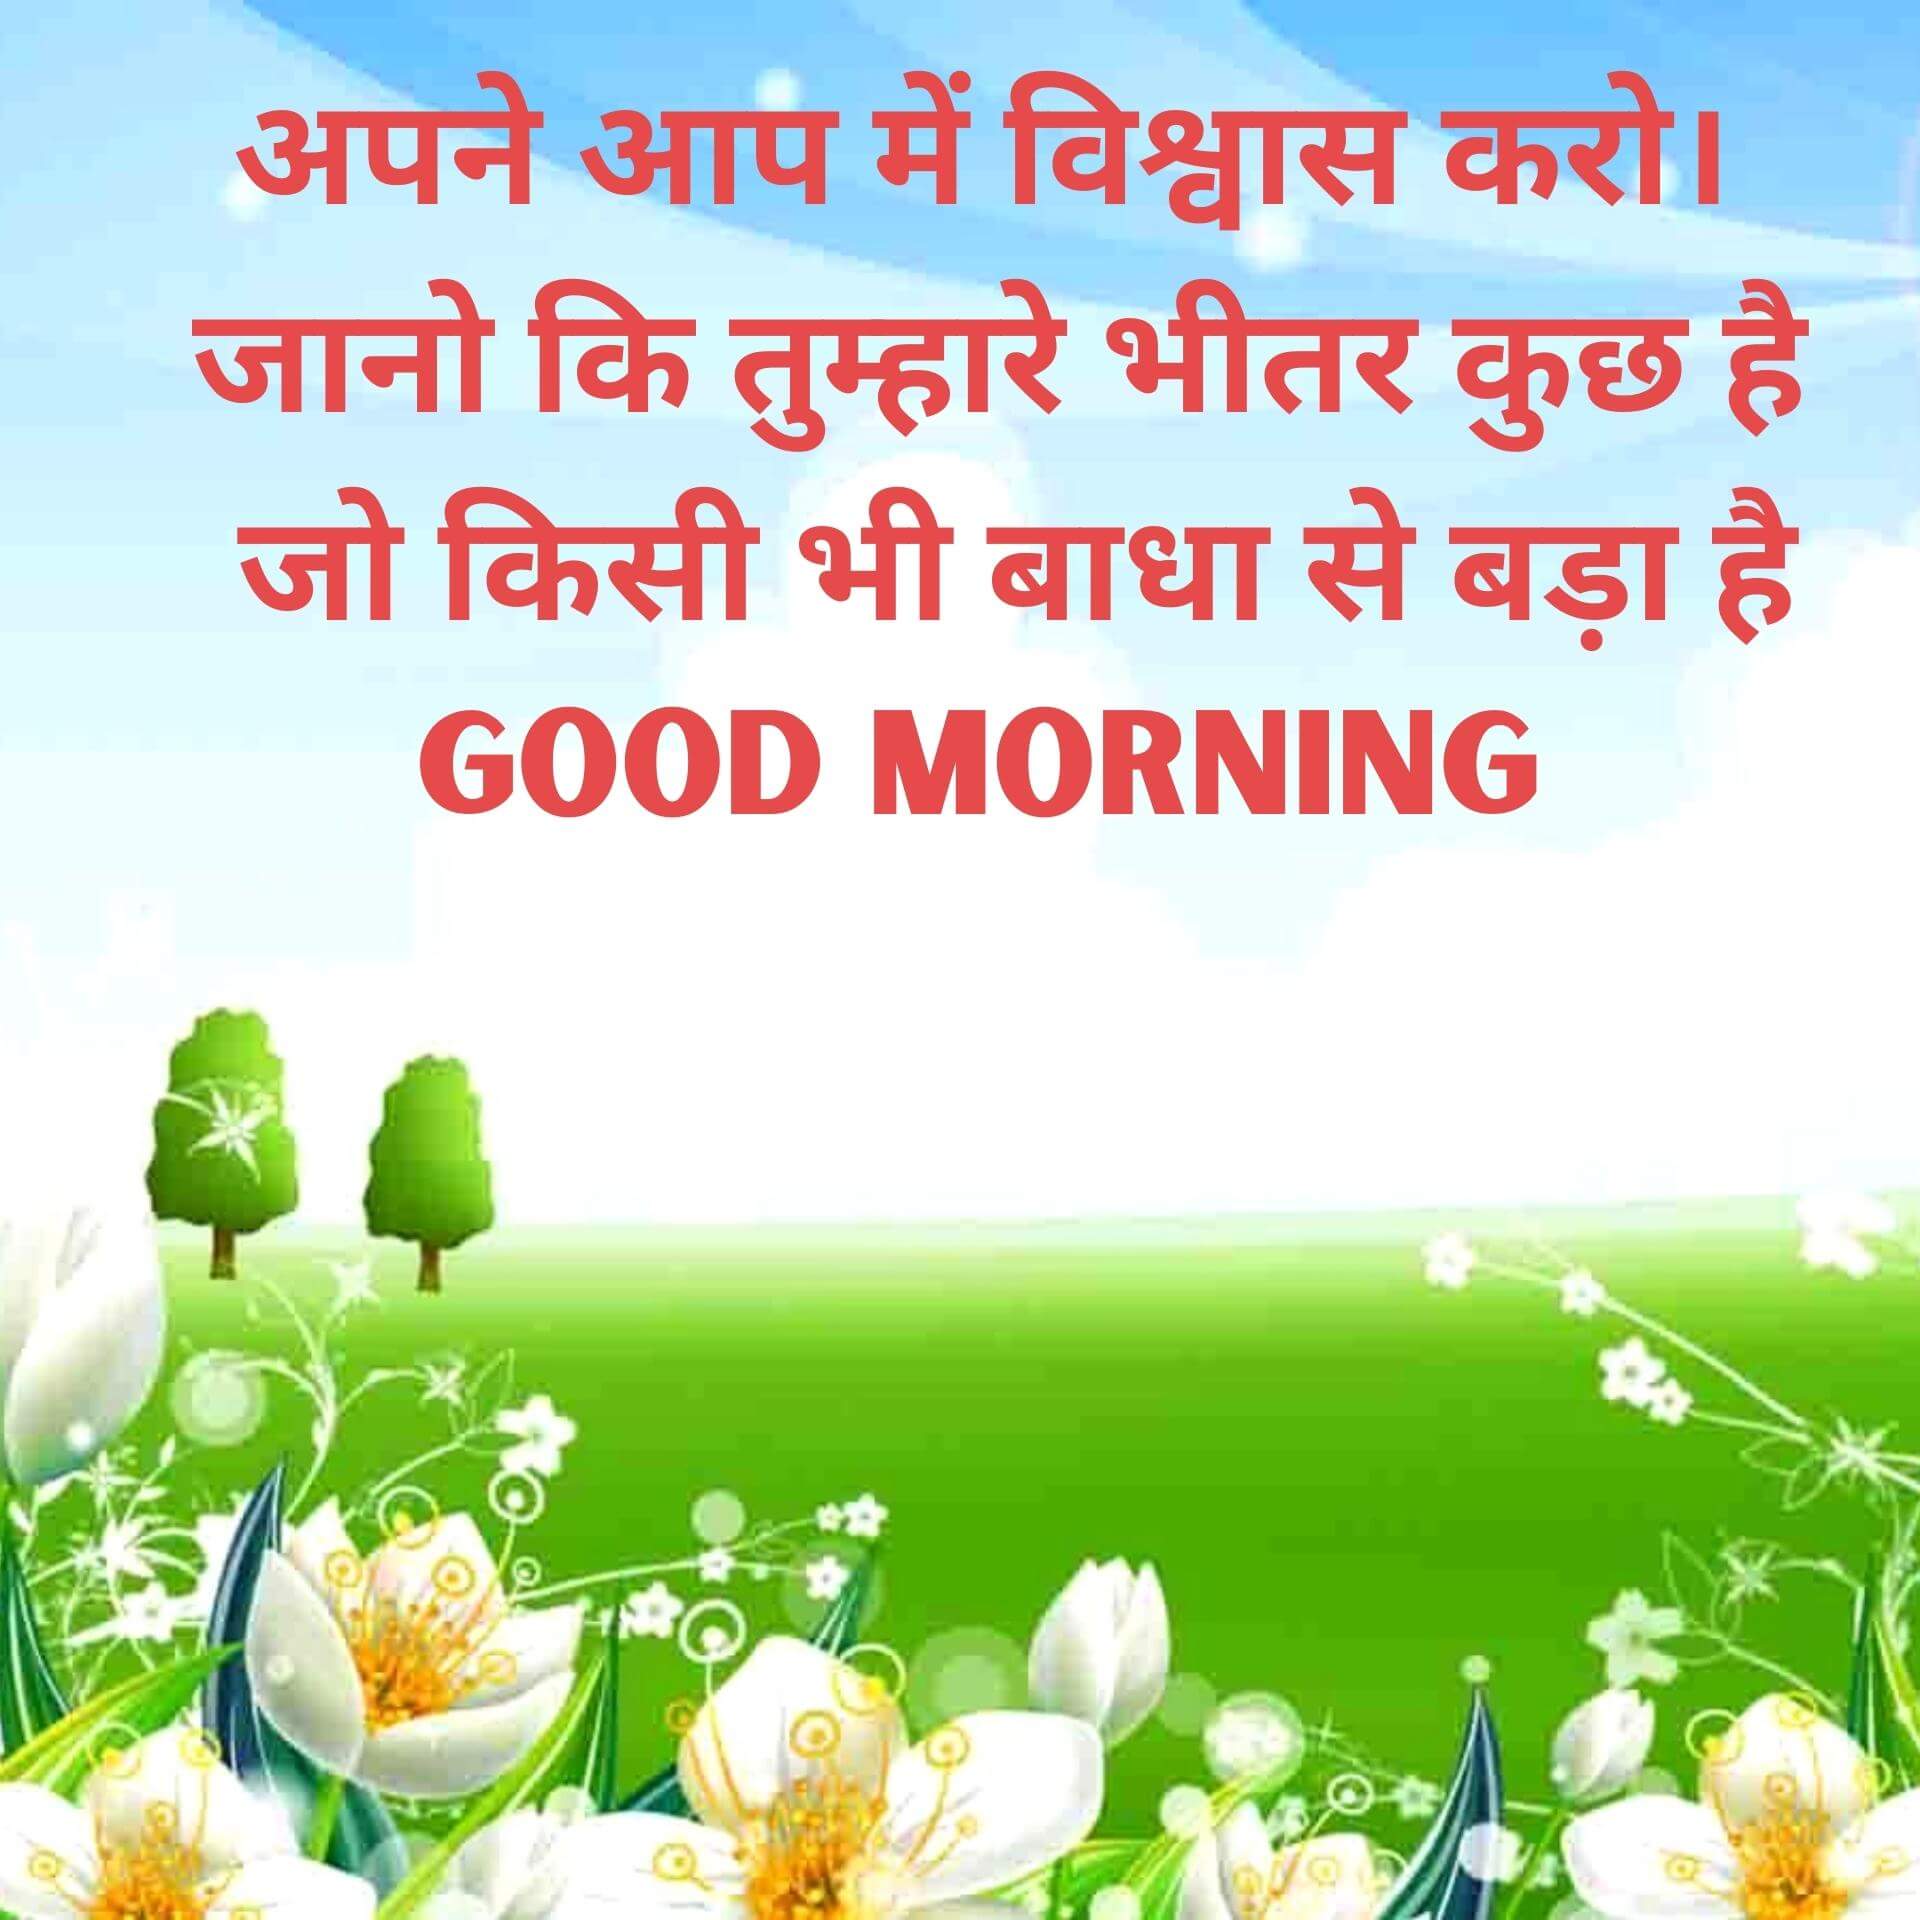 Good Morning Thoughts Images for Friend